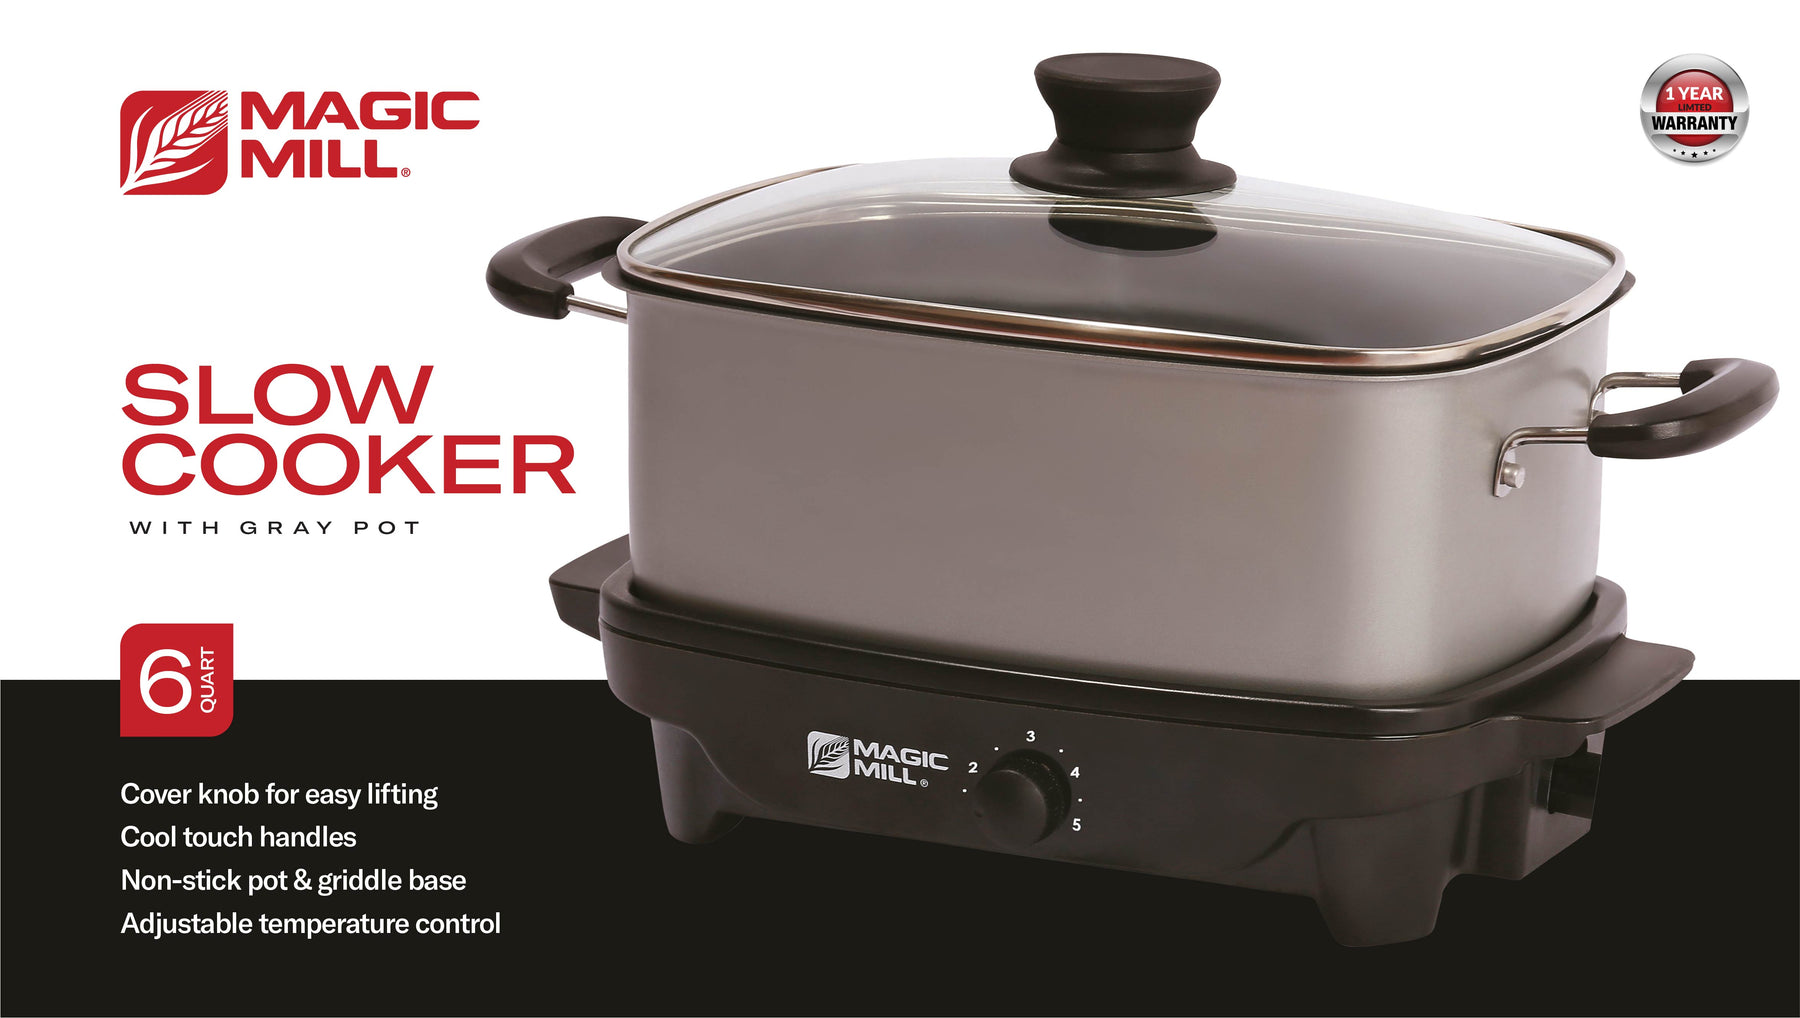 West Bend Non-Stick Slow Cookers